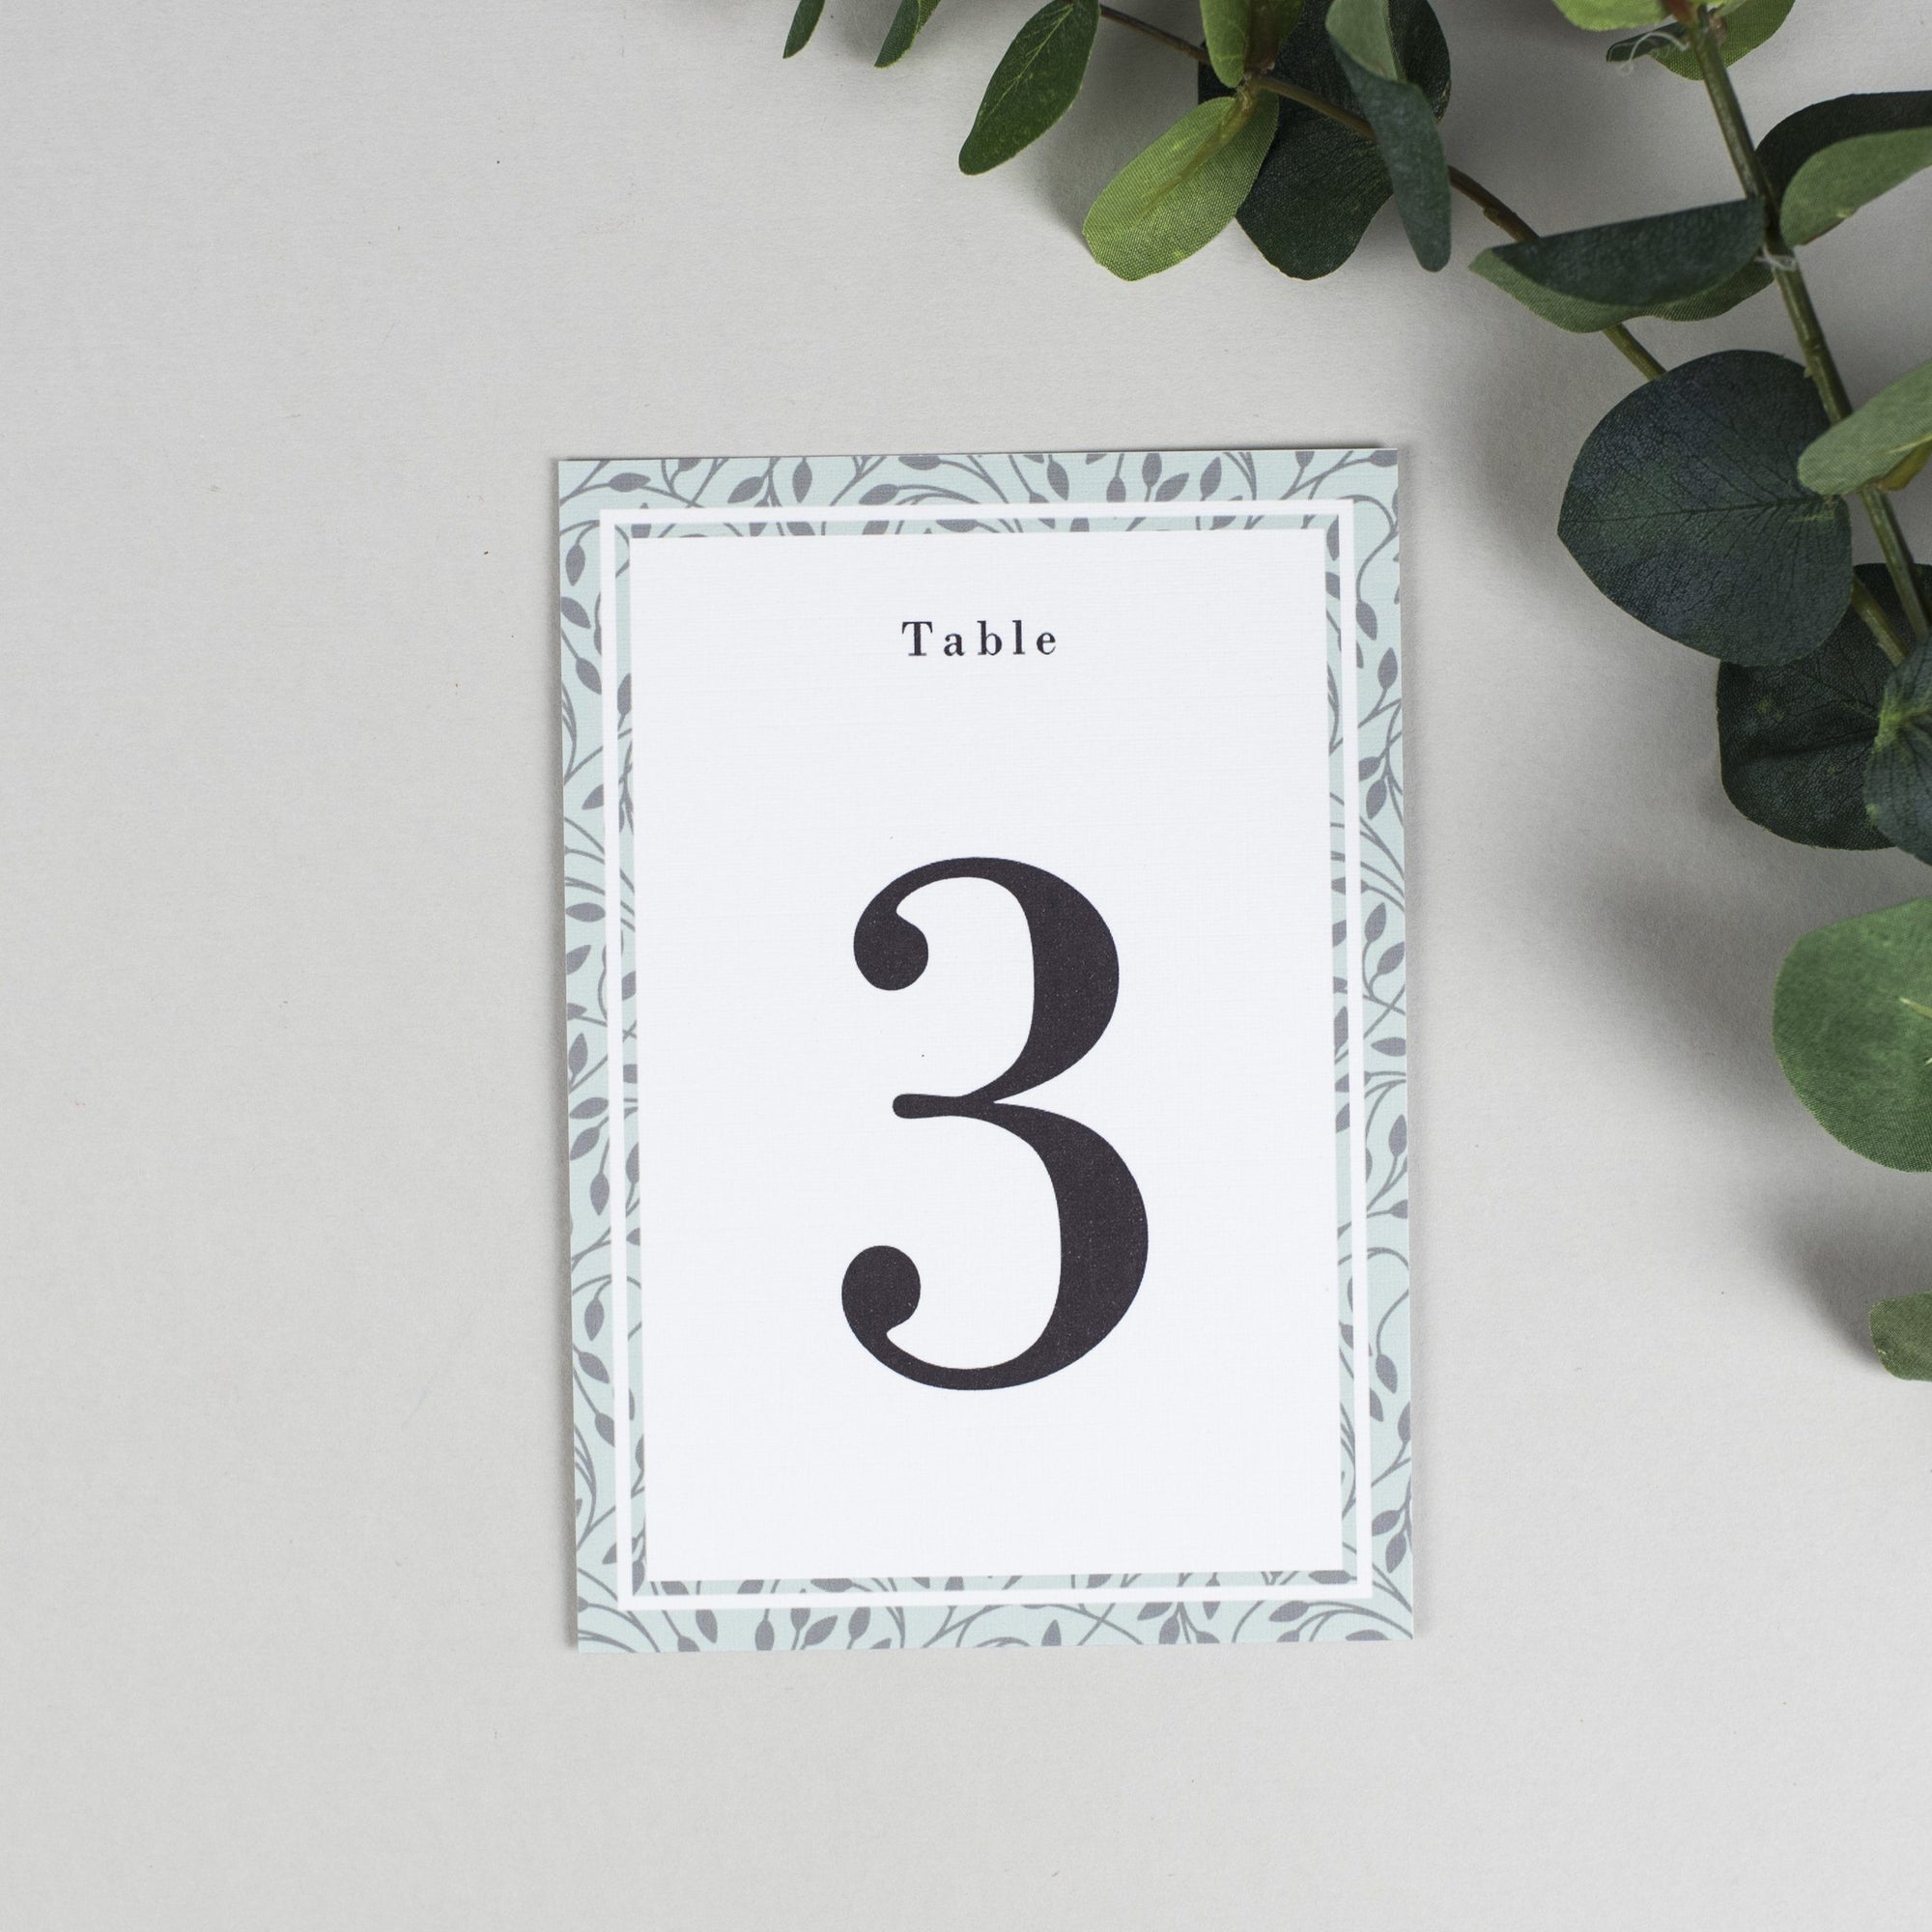 Table Names or Numbers - Clare - Vine 